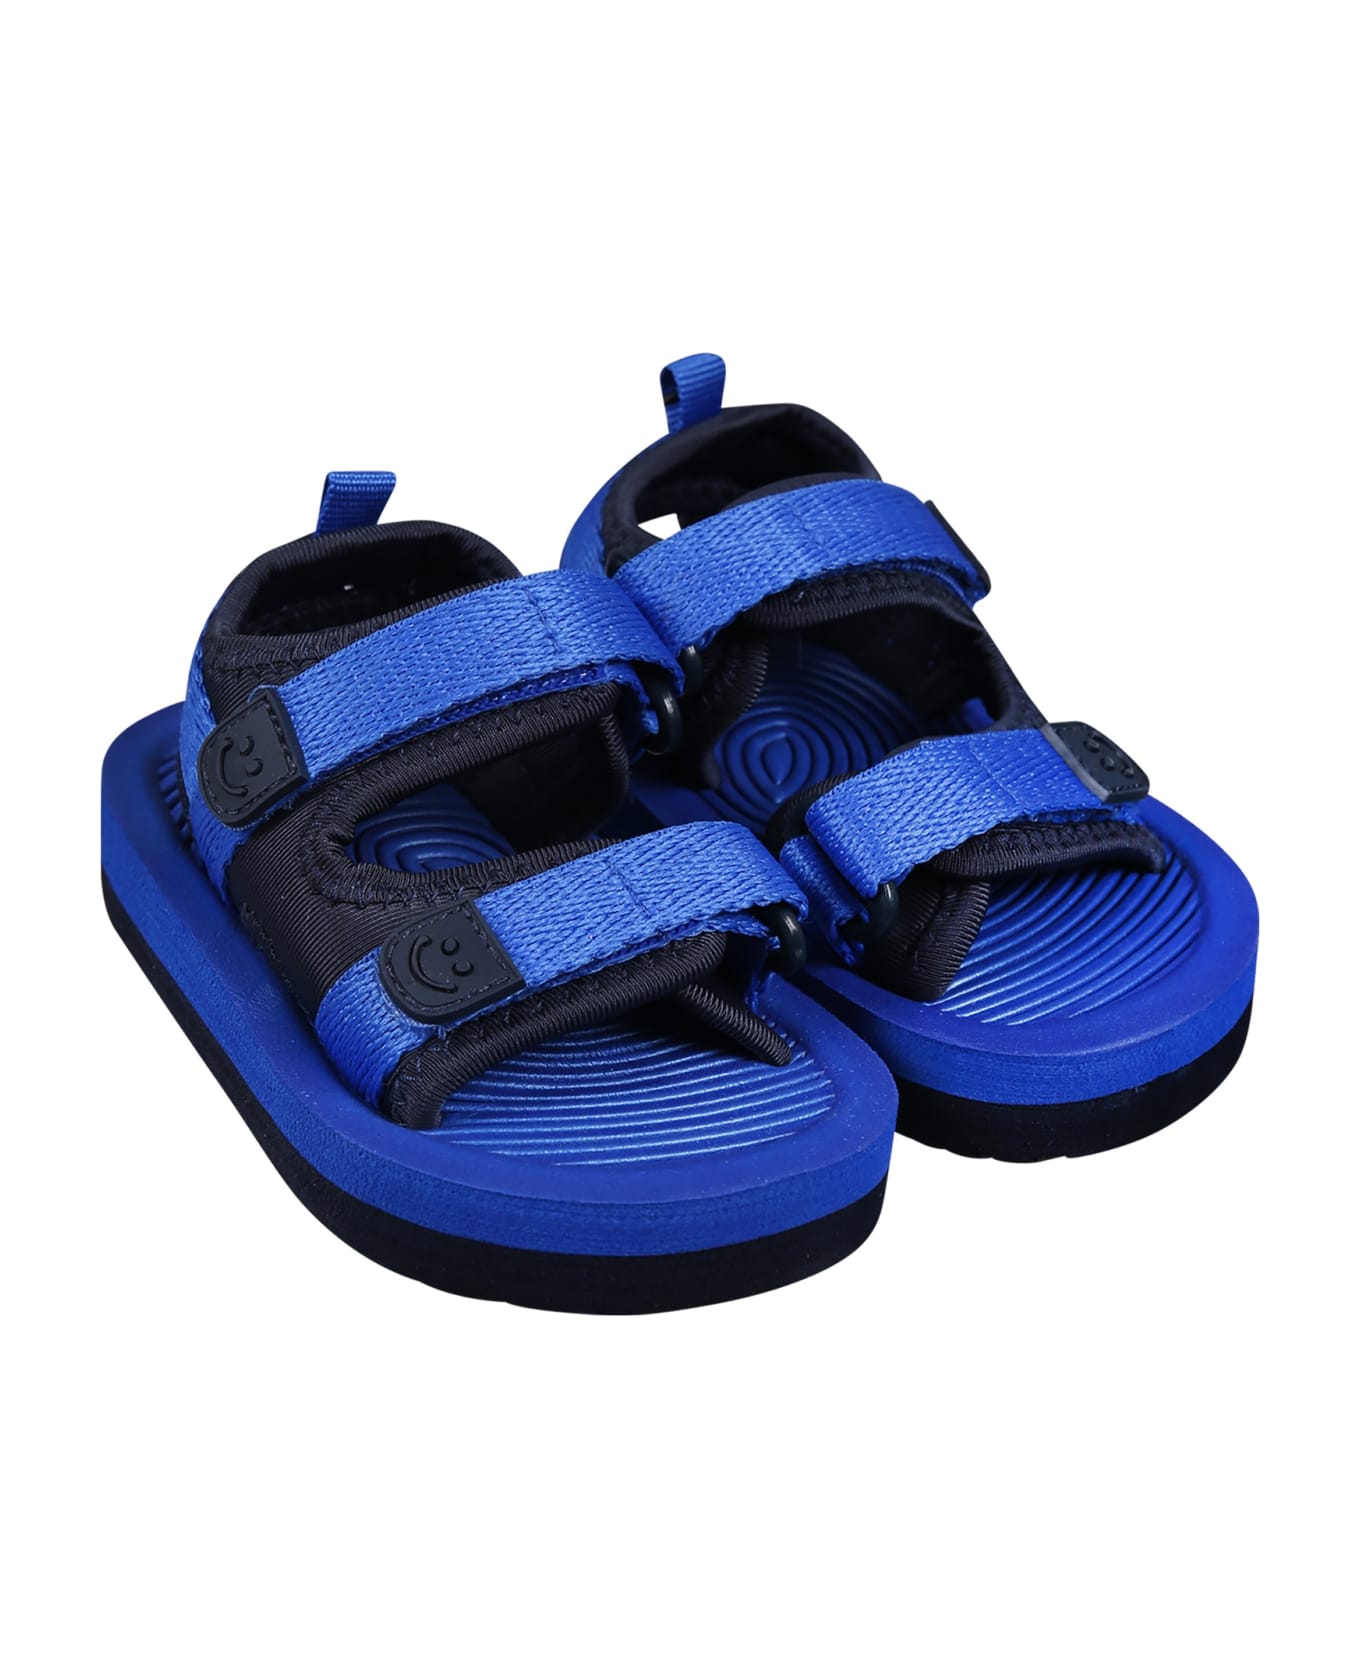 Molo Blue Sandals For Baby Boy With Logo - Blue シューズ